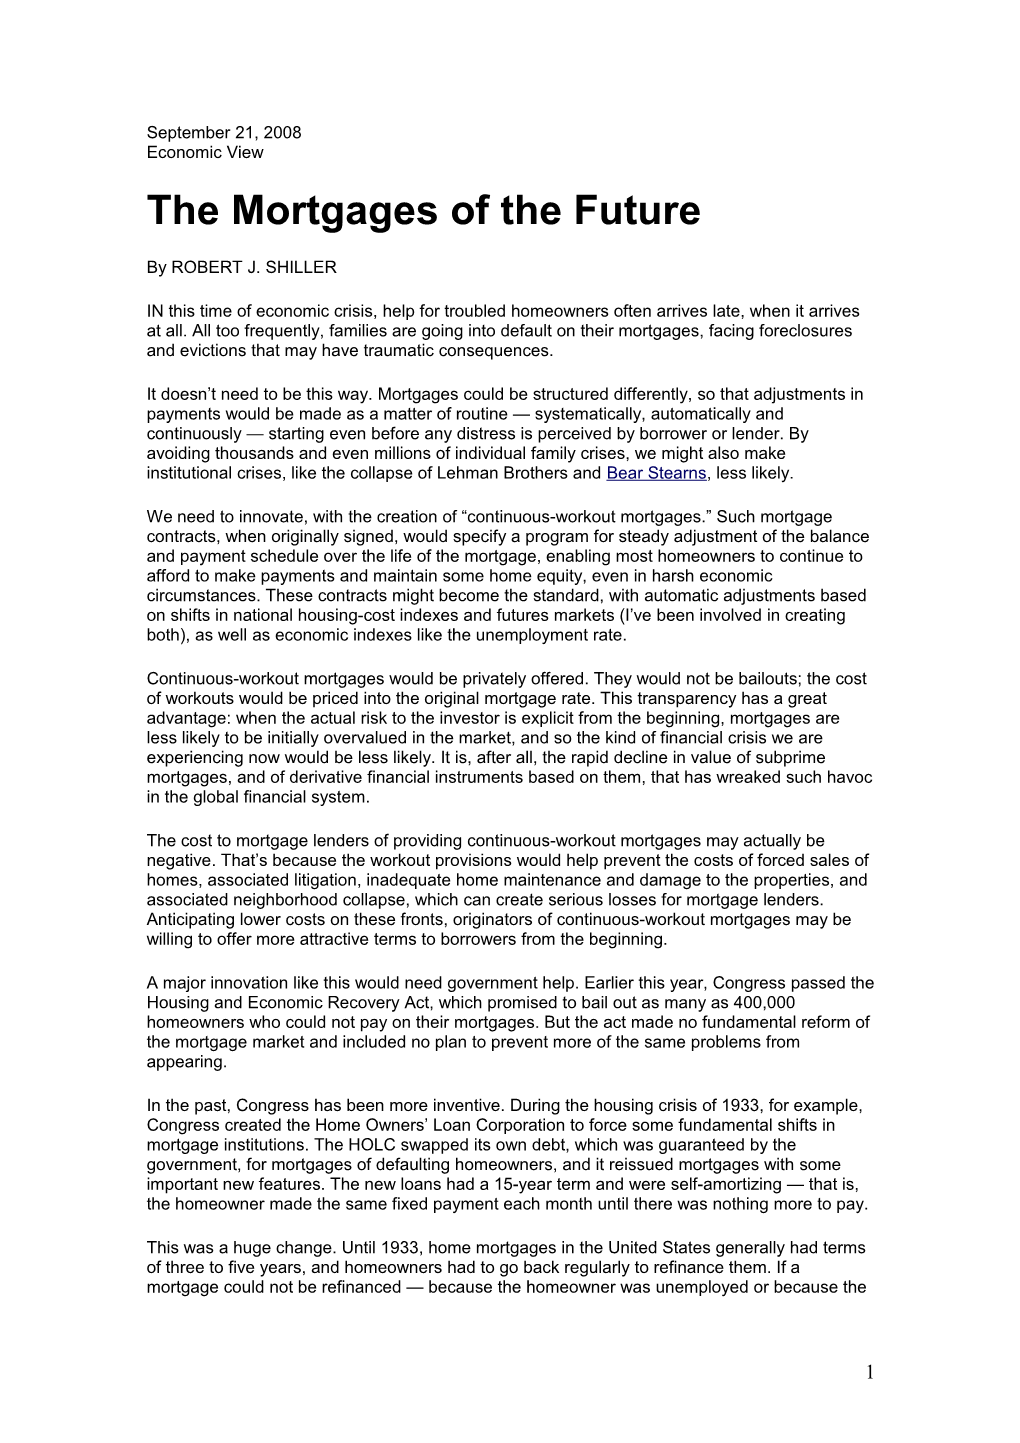 The Mortgages of the Future